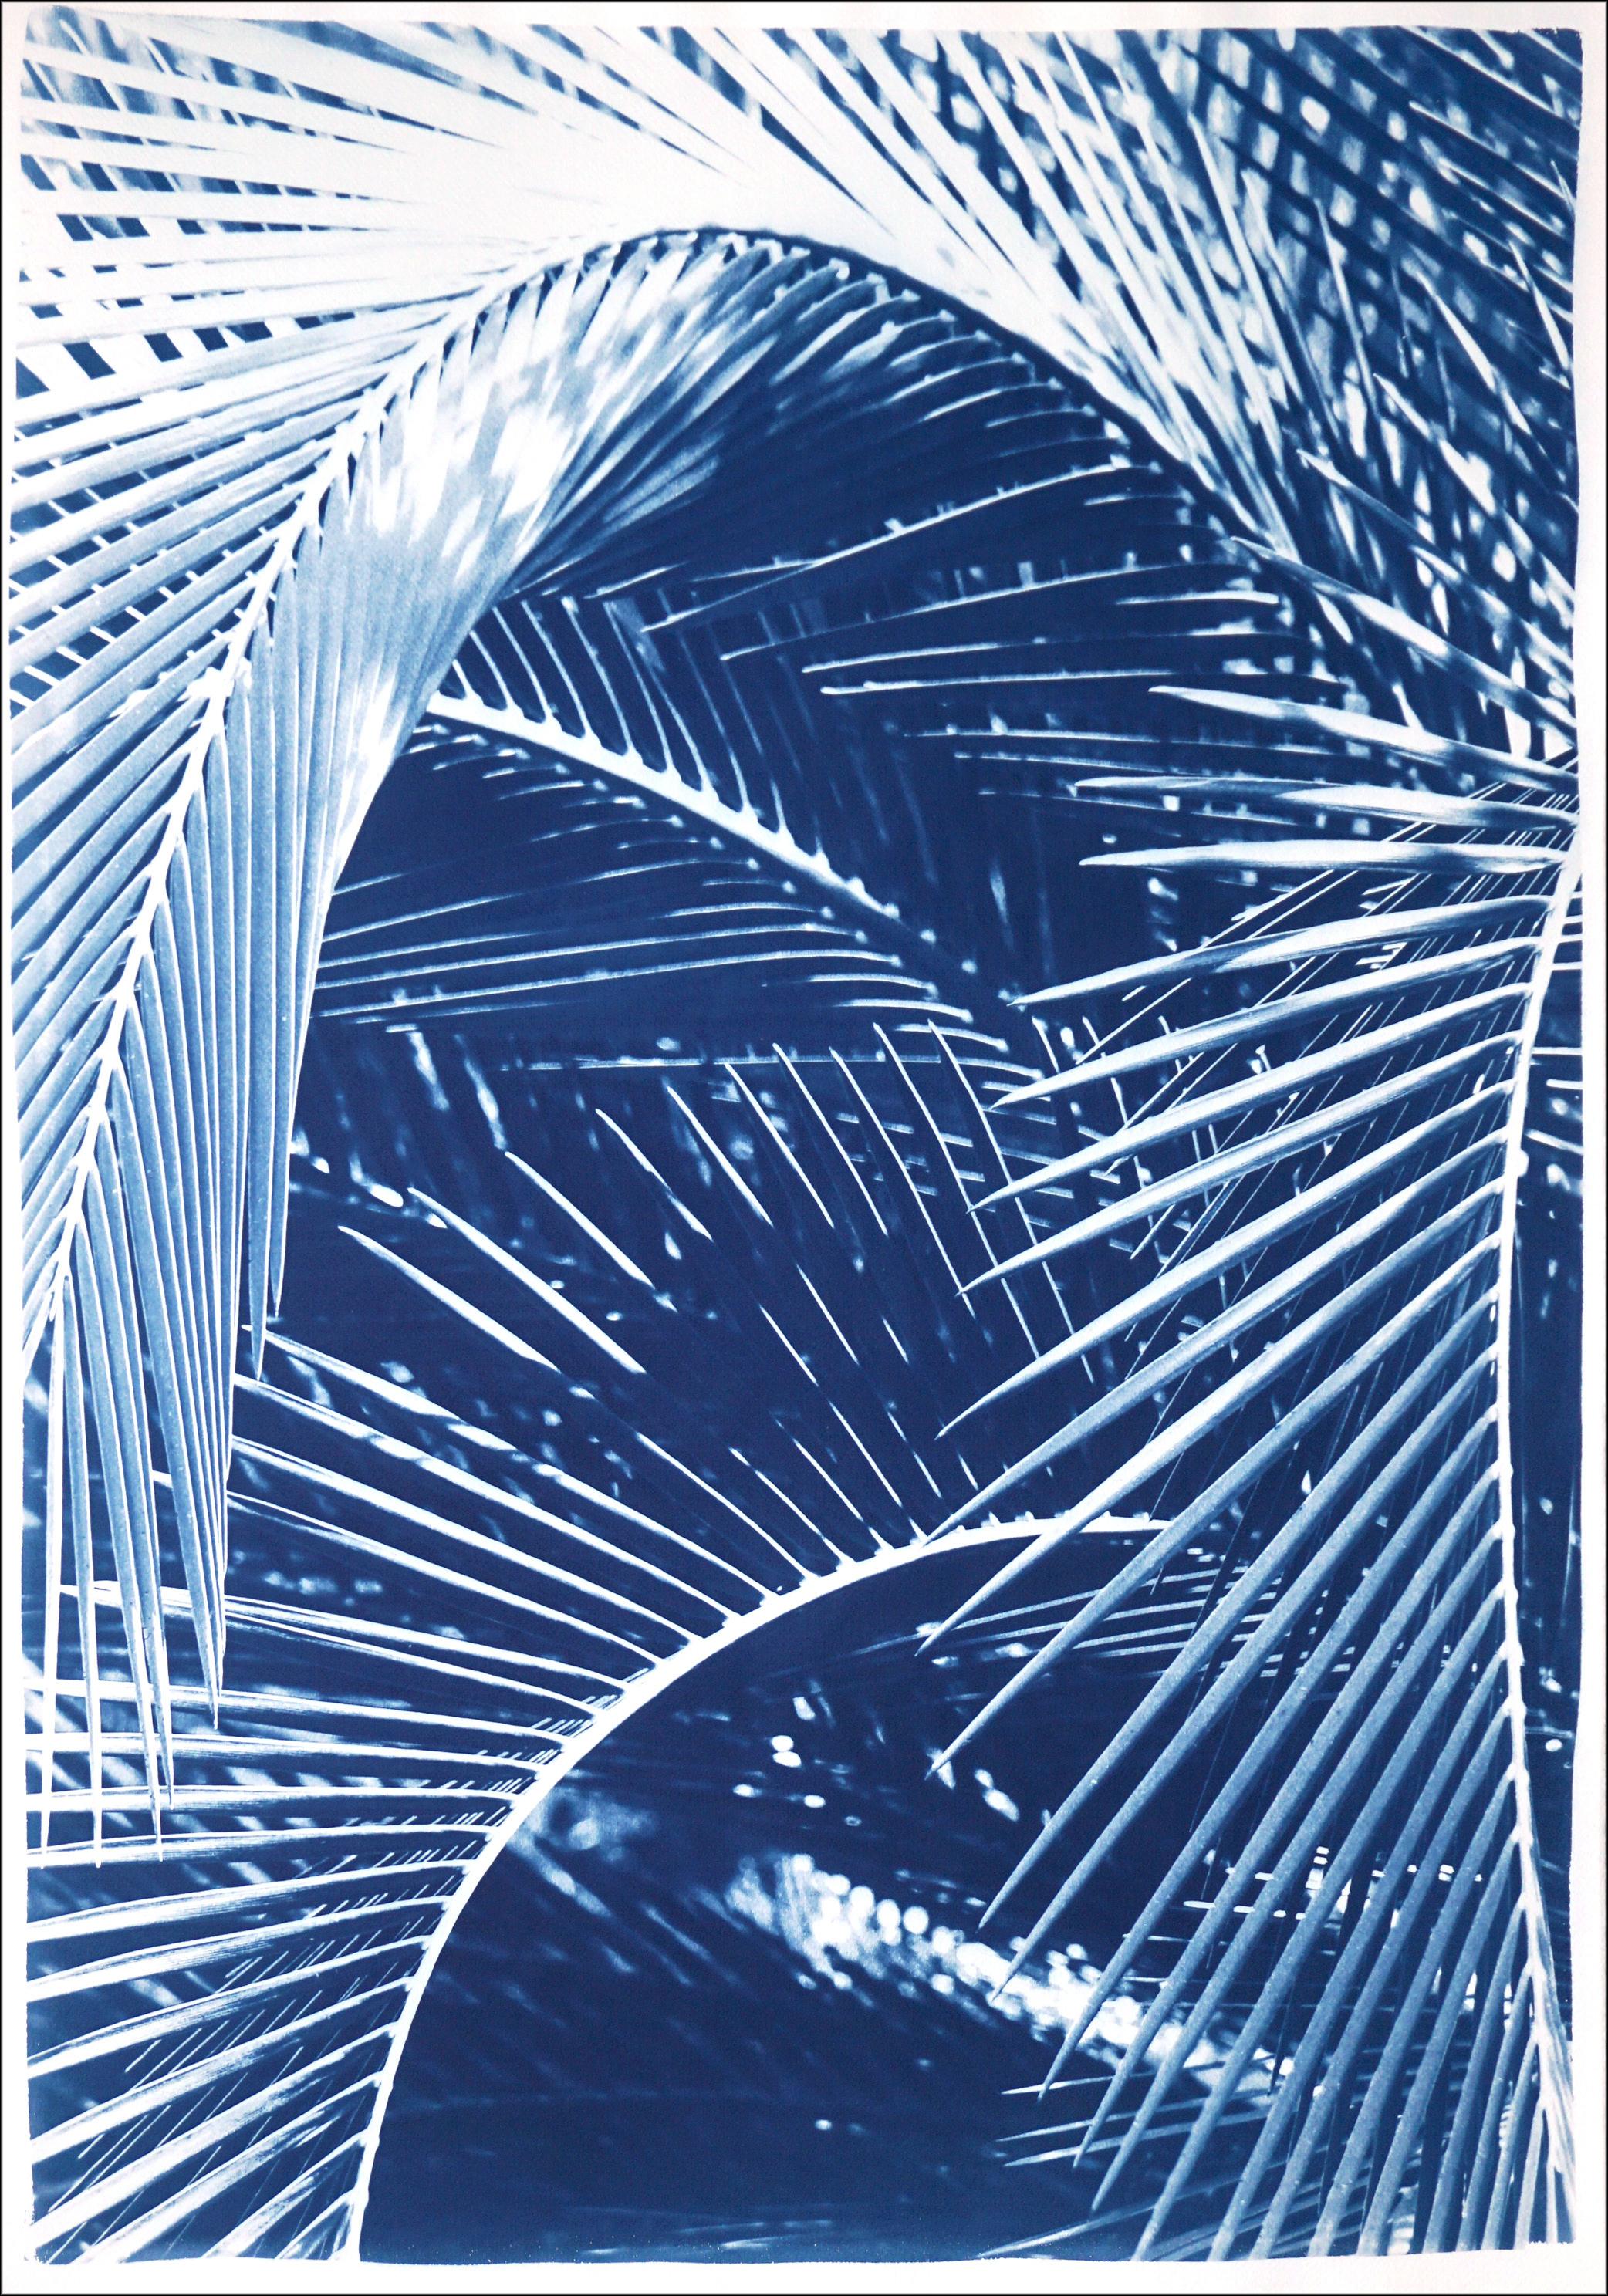 Botanical Triptych Cyanotype Print of Shady Majesty Palm Leaves Garden in Blue  - Naturalistic Painting by Kind of Cyan